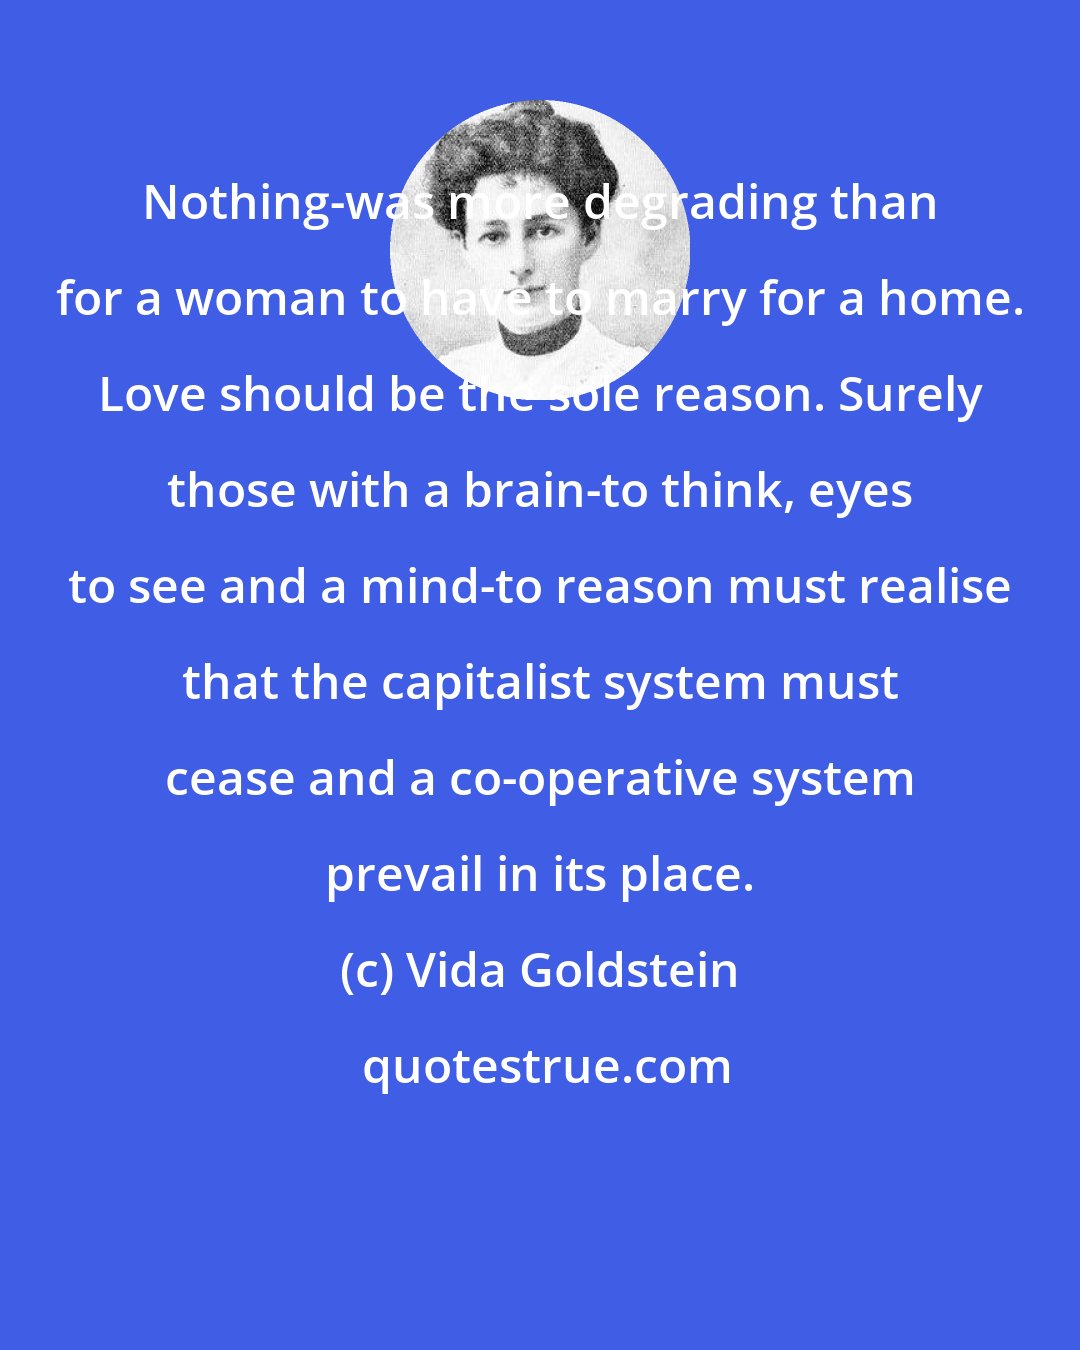 Vida Goldstein: Nothing-was more degrading than for a woman to have to marry for a home. Love should be the sole reason. Surely those with a brain-to think, eyes to see and a mind-to reason must realise that the capitalist system must cease and a co-operative system prevail in its place.